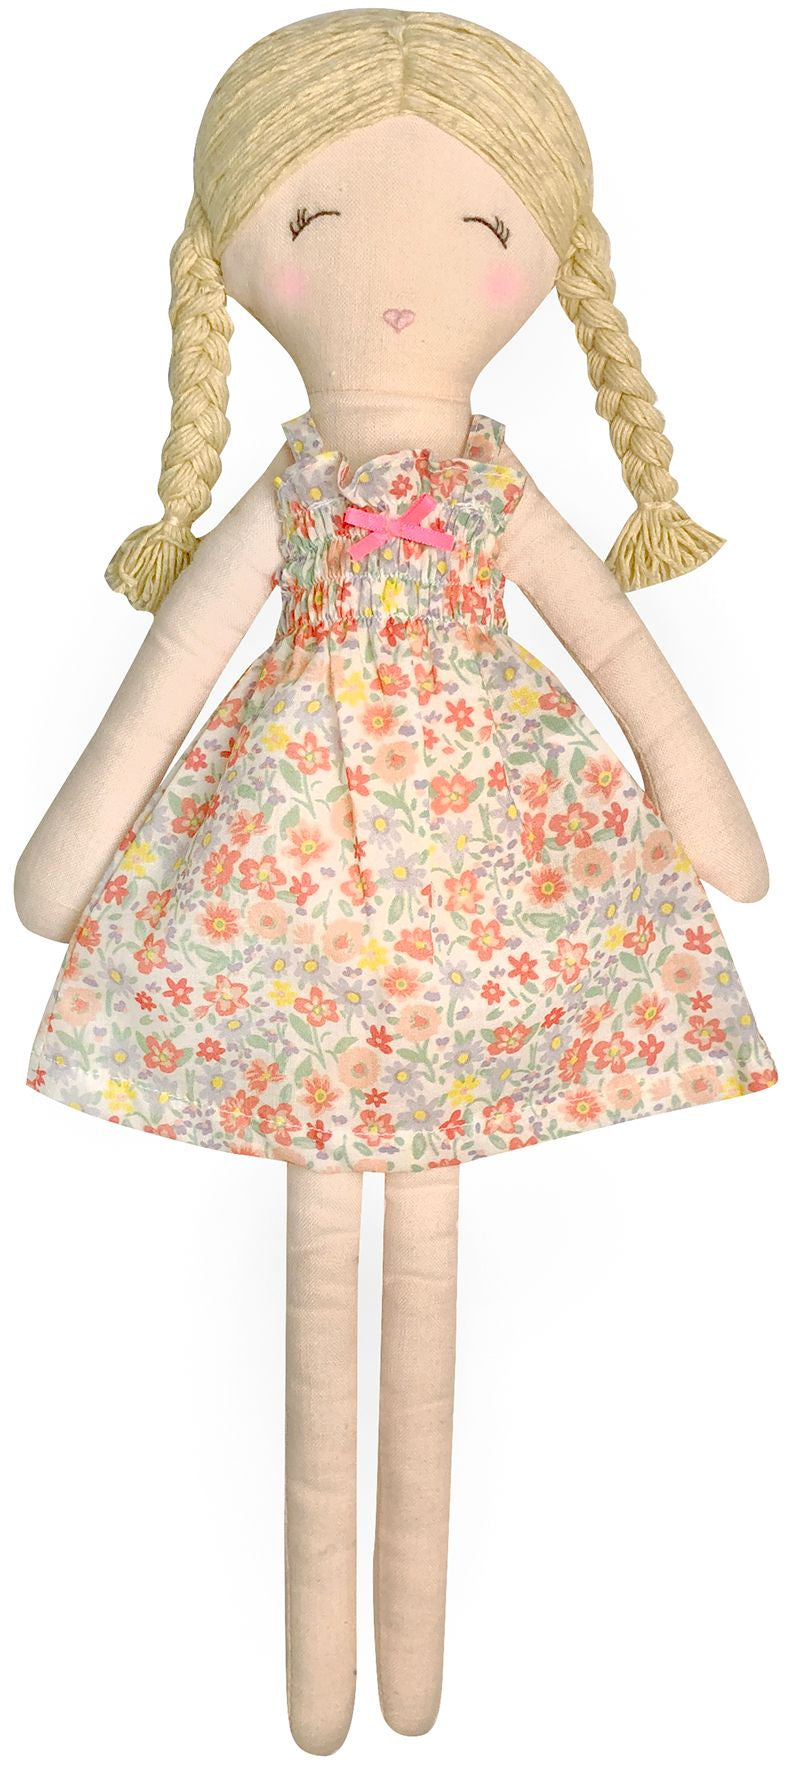 Laurie Strap Dress Doll